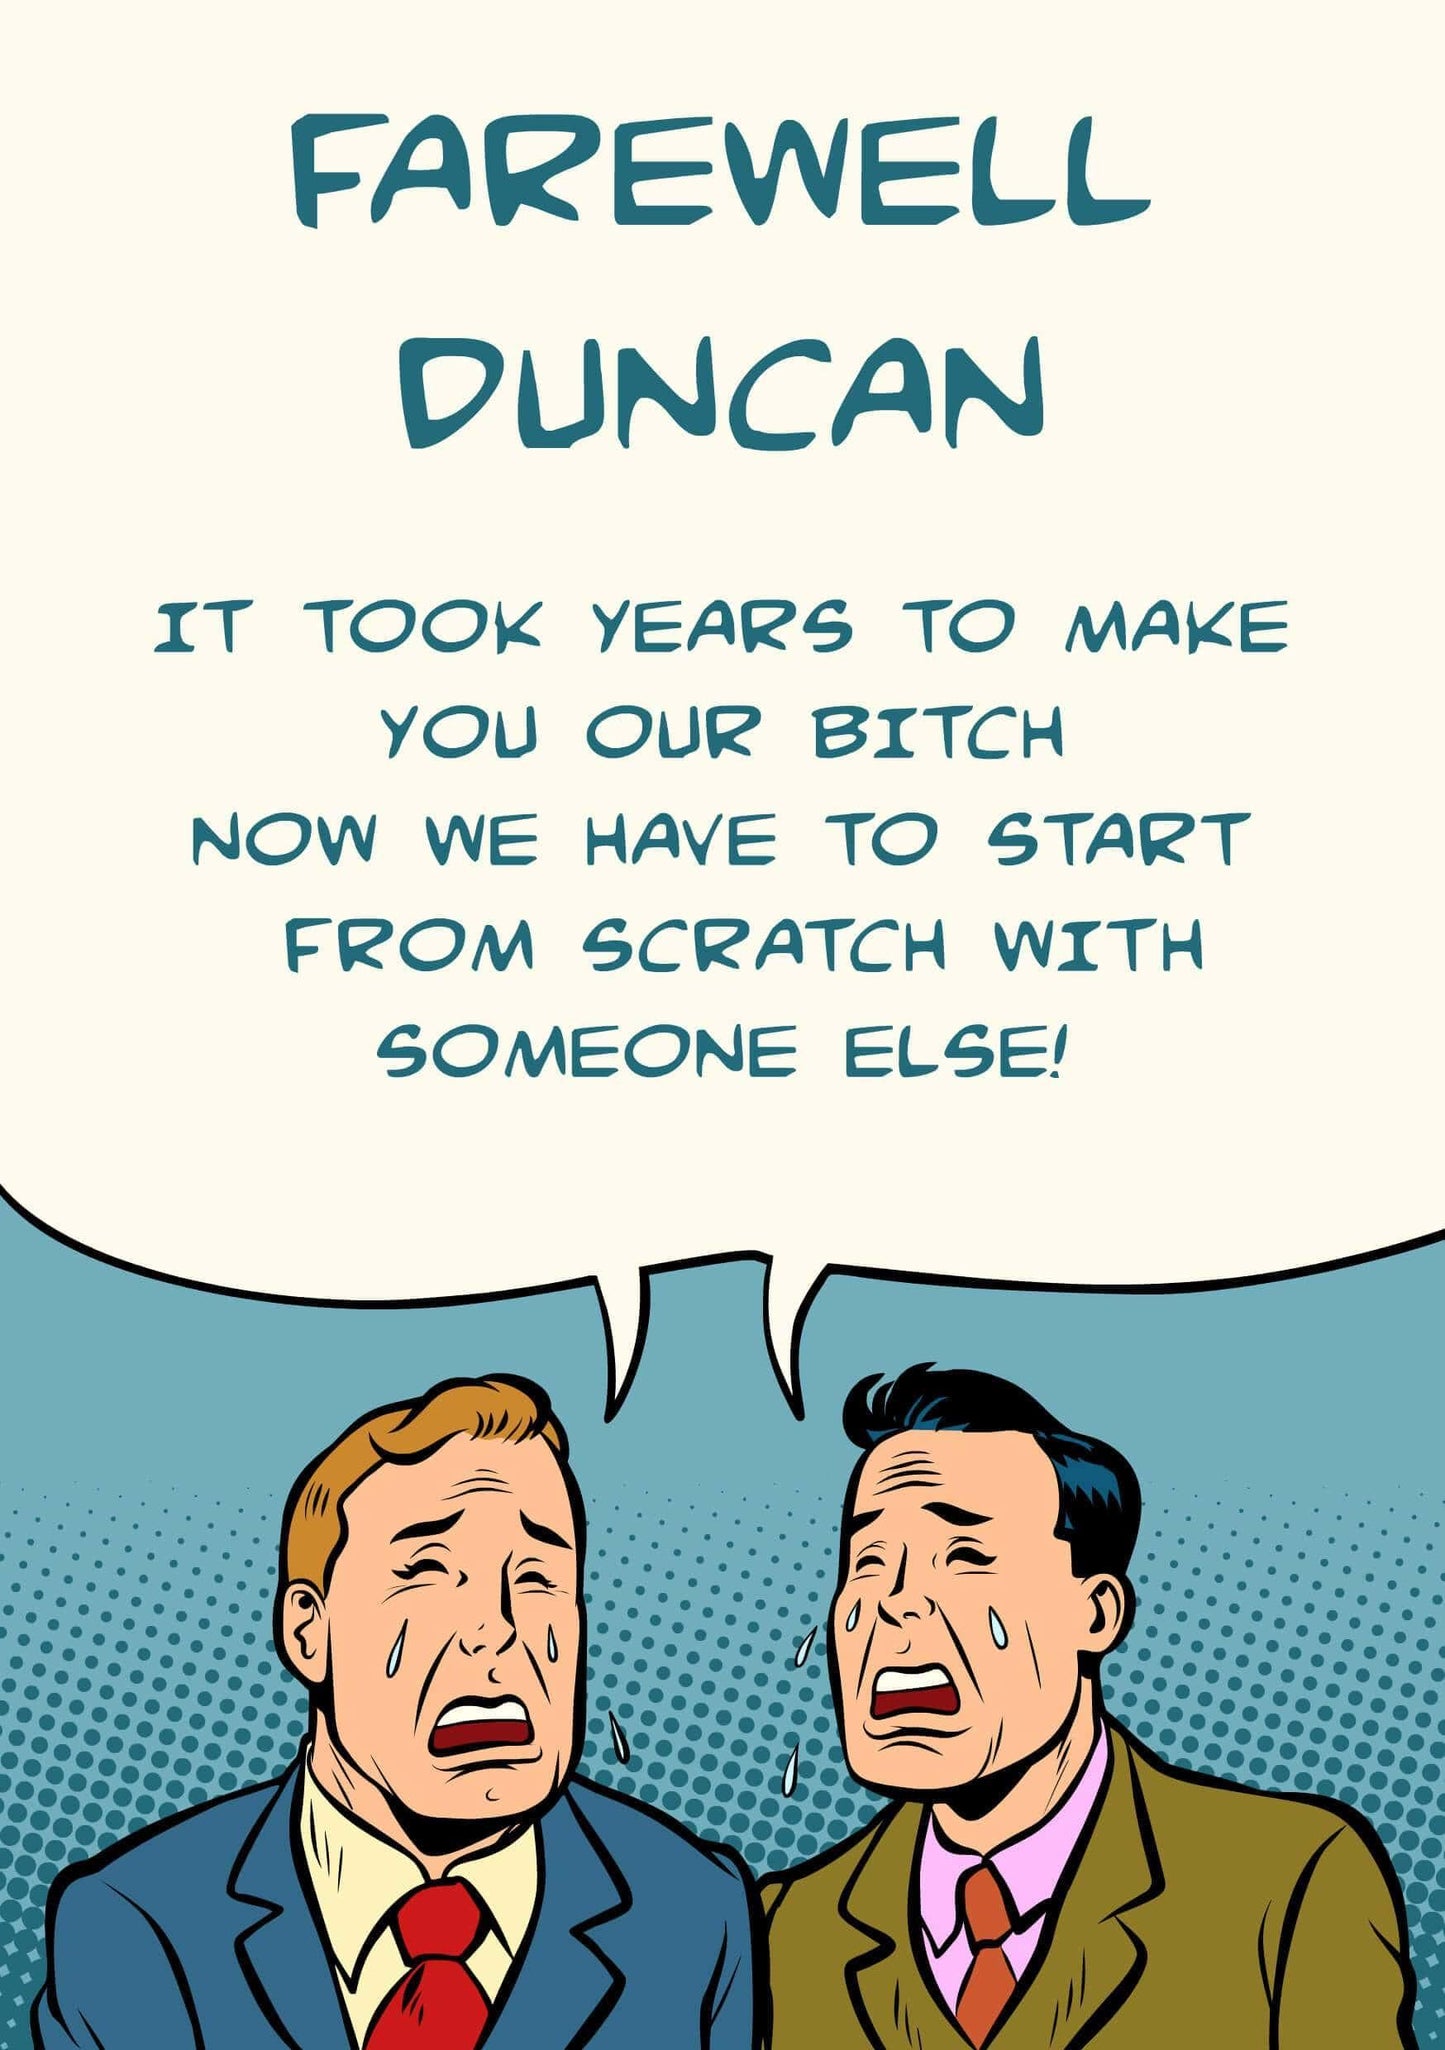 Farewell greeting card for Our Bitch Duncan, made by Twisted Gifts.